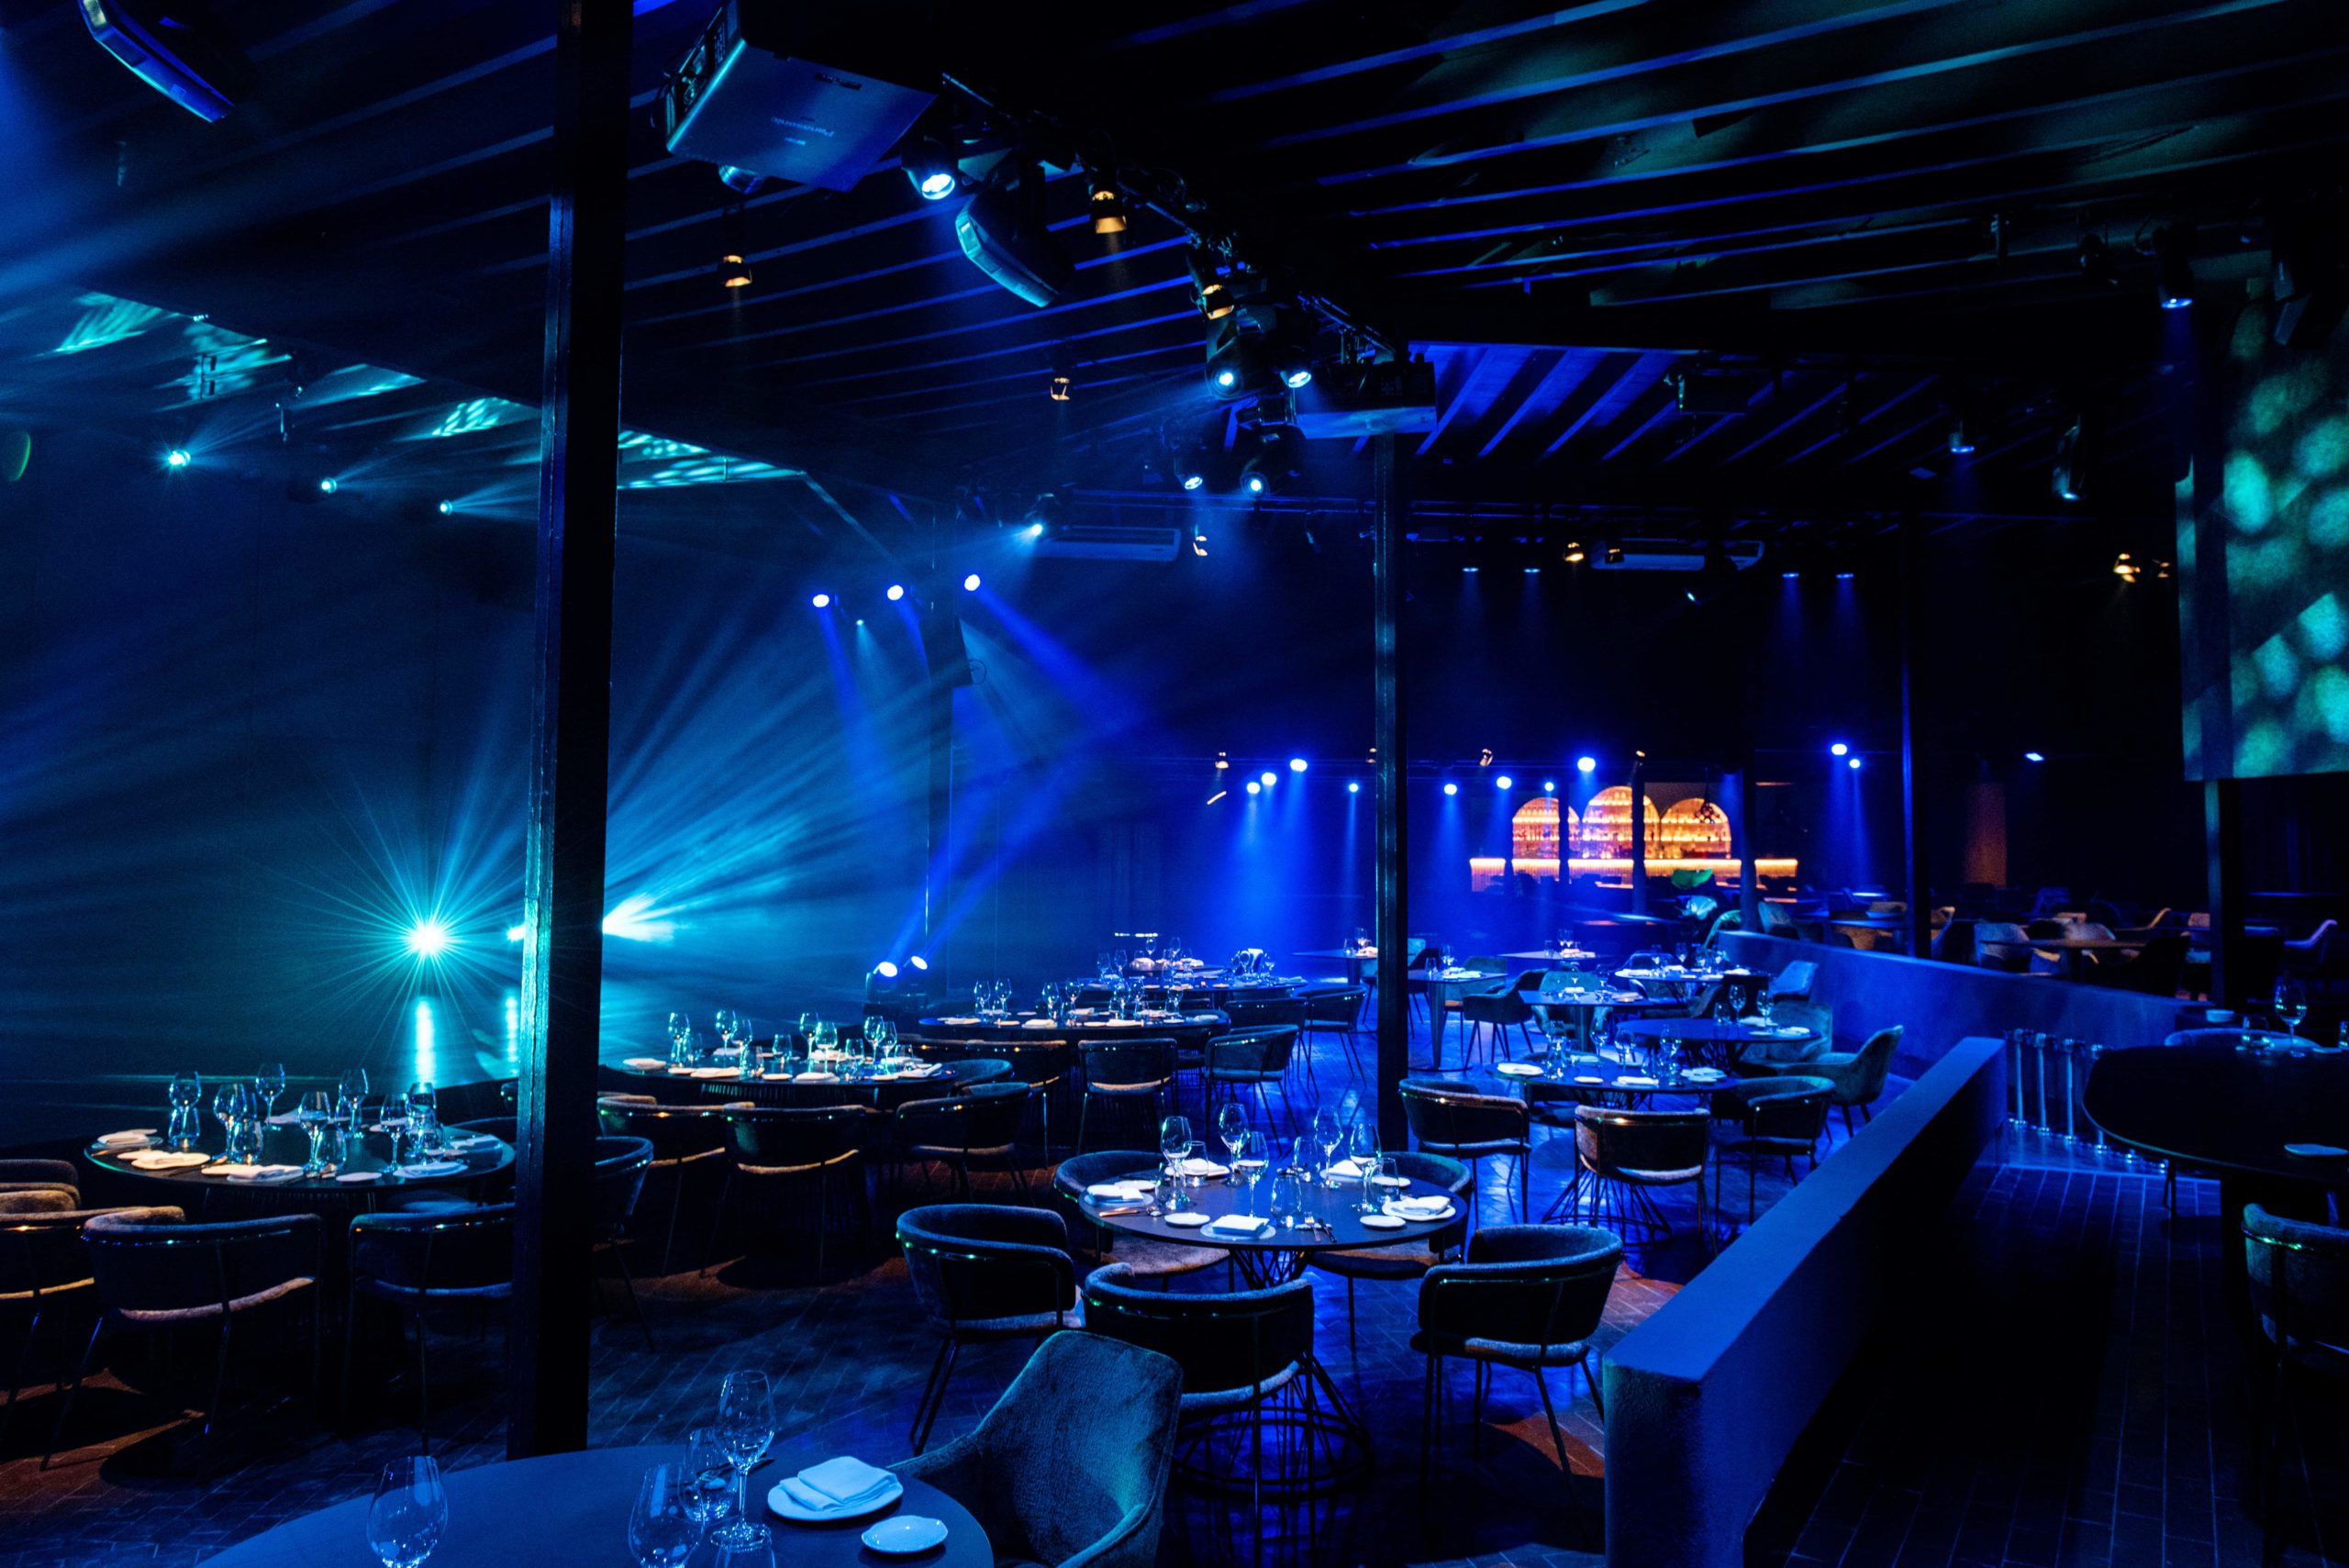 What is 528 Ibiza: Teatro lit up in blue lights